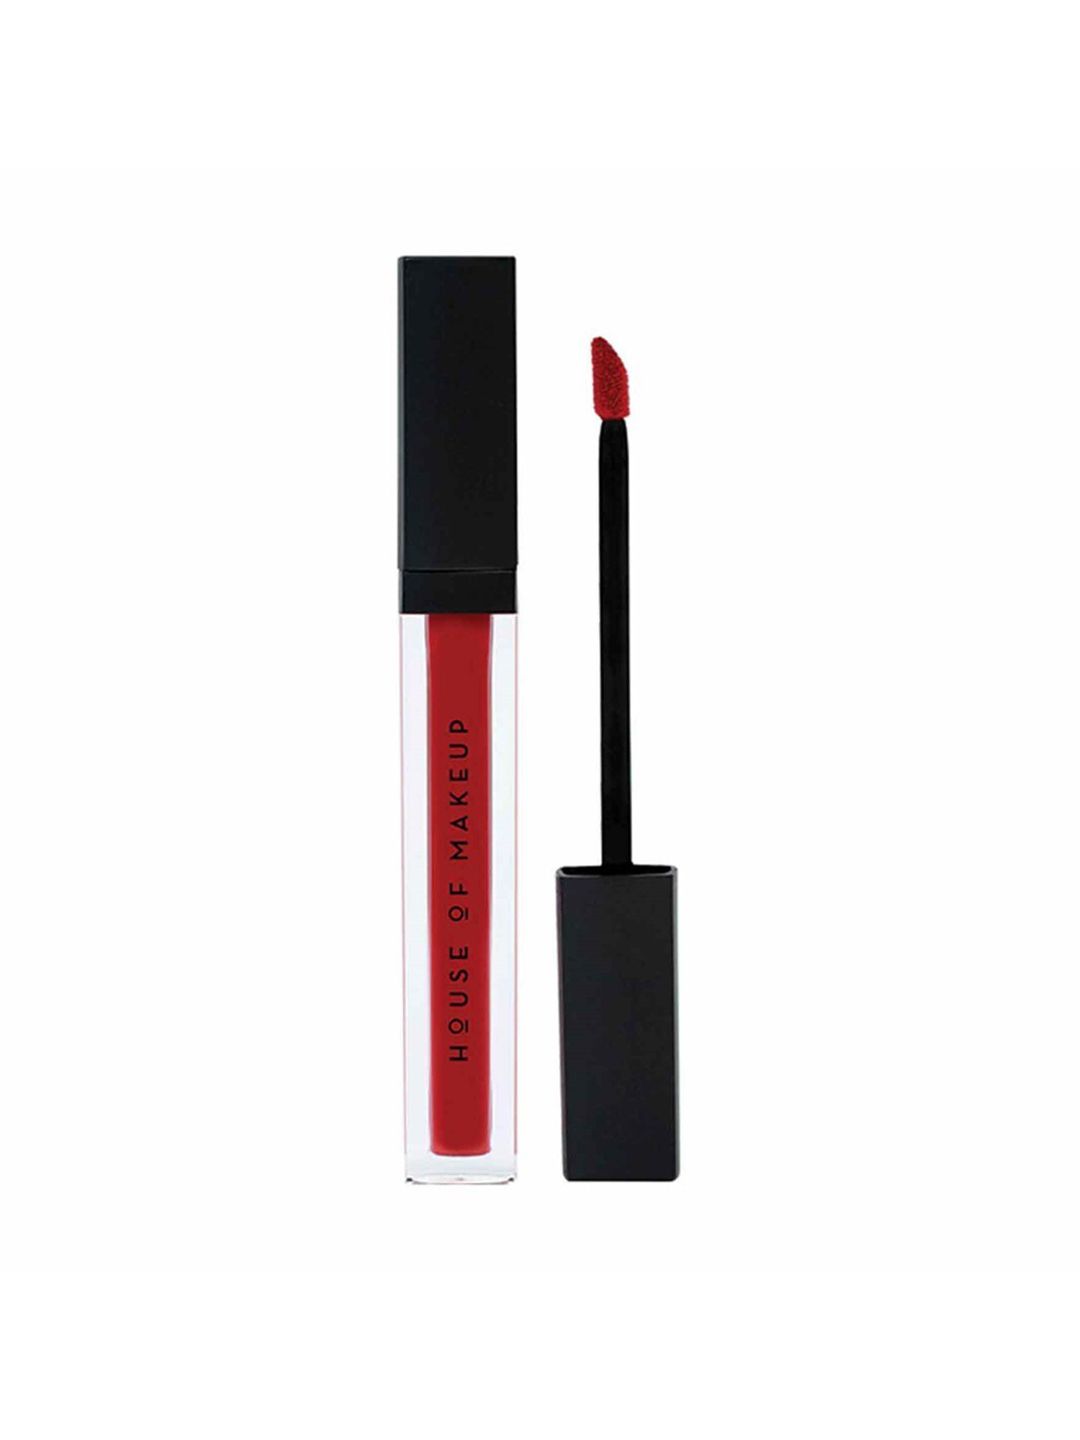 HOUSE OF MAKEUP Pout Potion Liquid Matte Lipstick-Sorry not Sorry Price in India